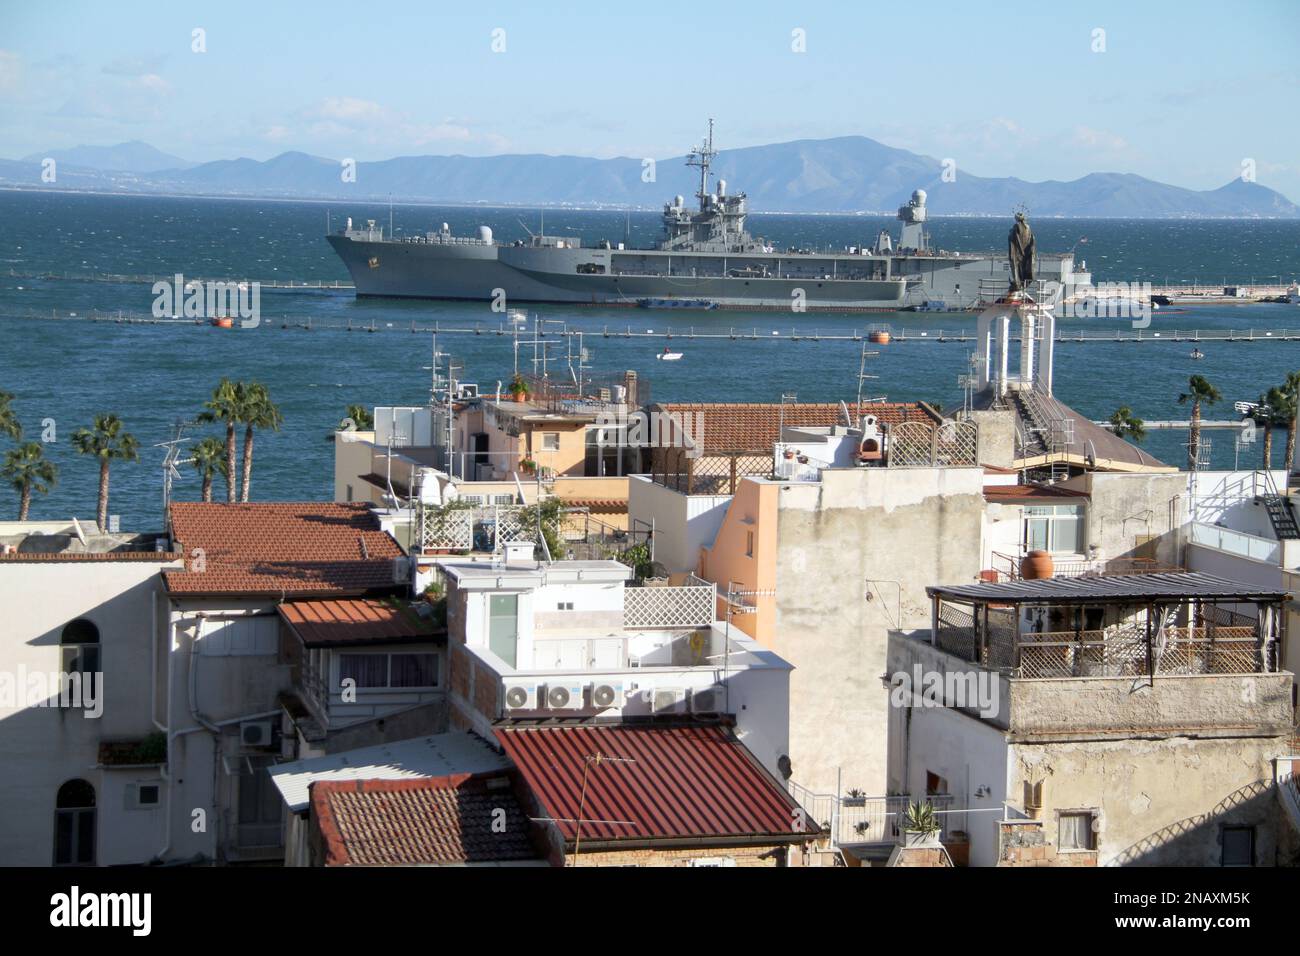 The flagship of the U.S. 6th Fleet, USS Mount Whitney, homeported in Gaeta, Italy Stock Photo